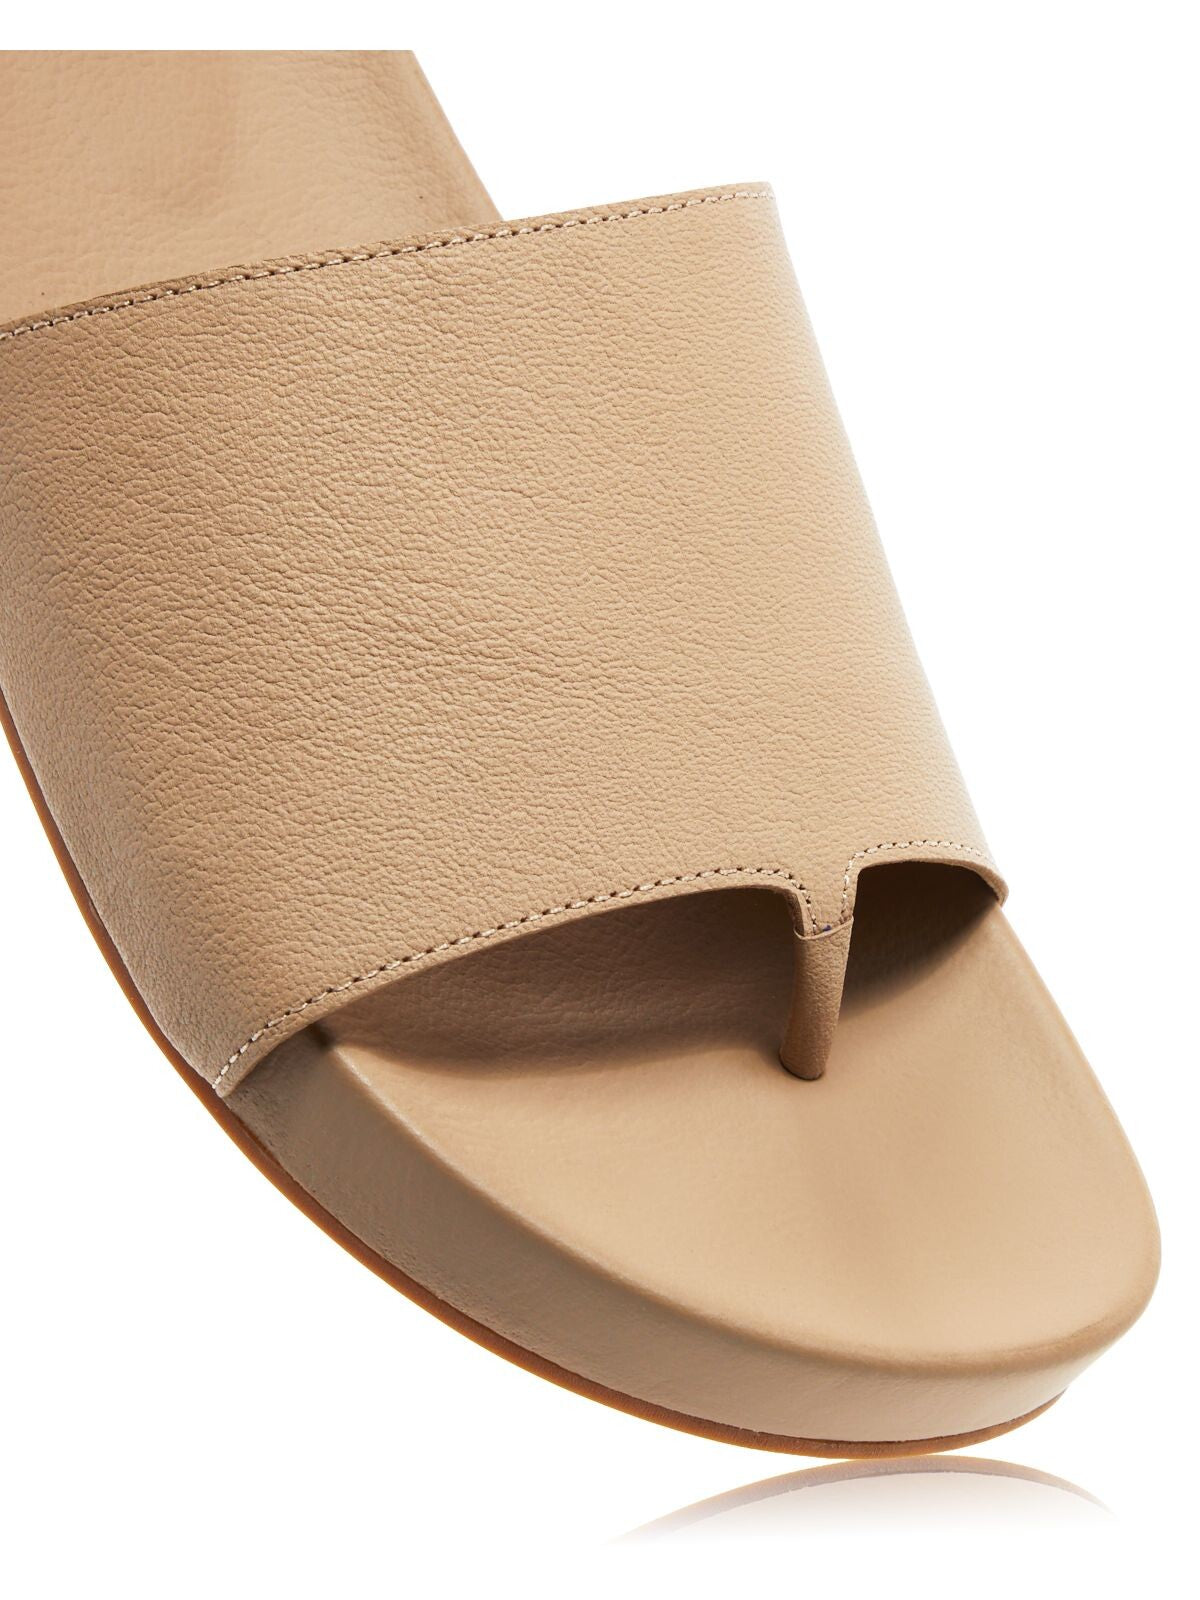 EILEEN FISHER Womens Beige Comfort Motion Round Toe Platform Slip On Leather Thong Sandals Shoes M